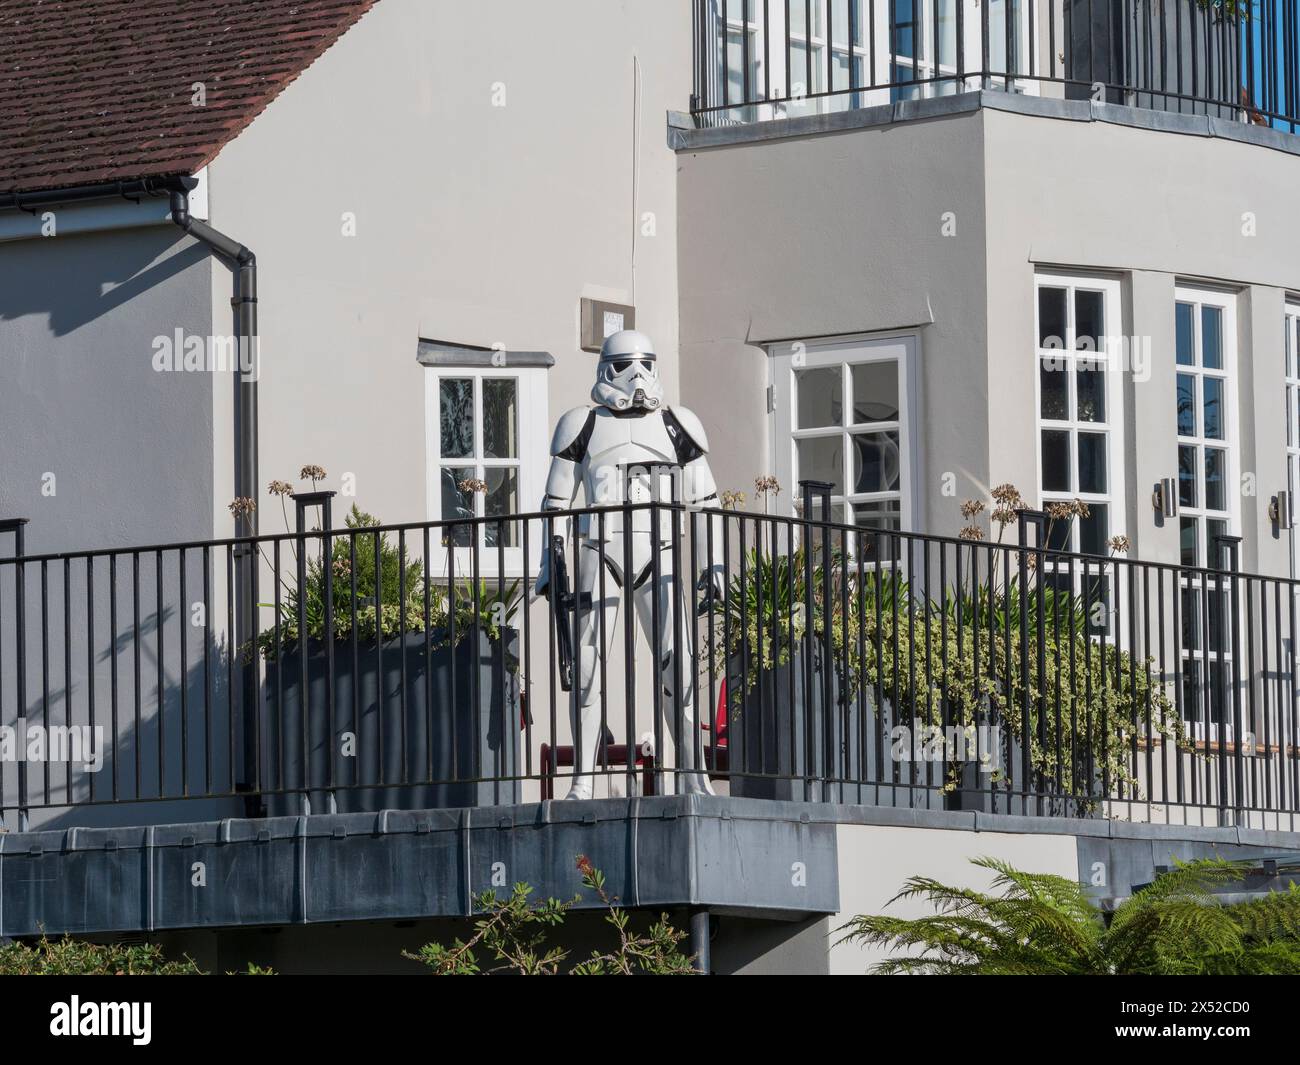 A Star Wars Stormtrooper suit standing on a balconey of a house in Barnes, London, UK. Stock Photo